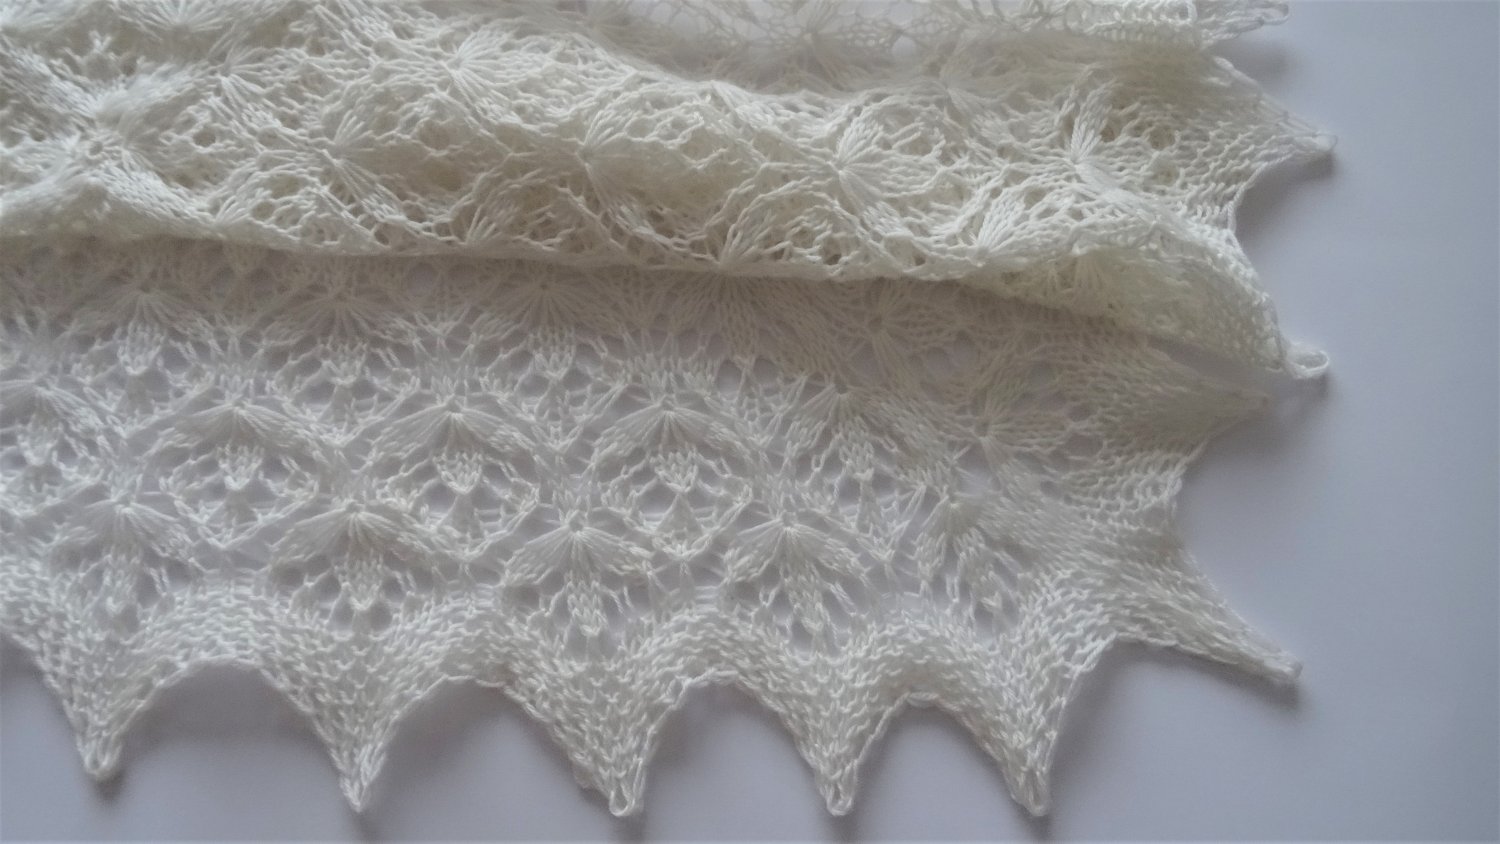 Hand Knitted Baby Blanket, Natural white baby Blanket, Pure Merino wool, Estonian Lace